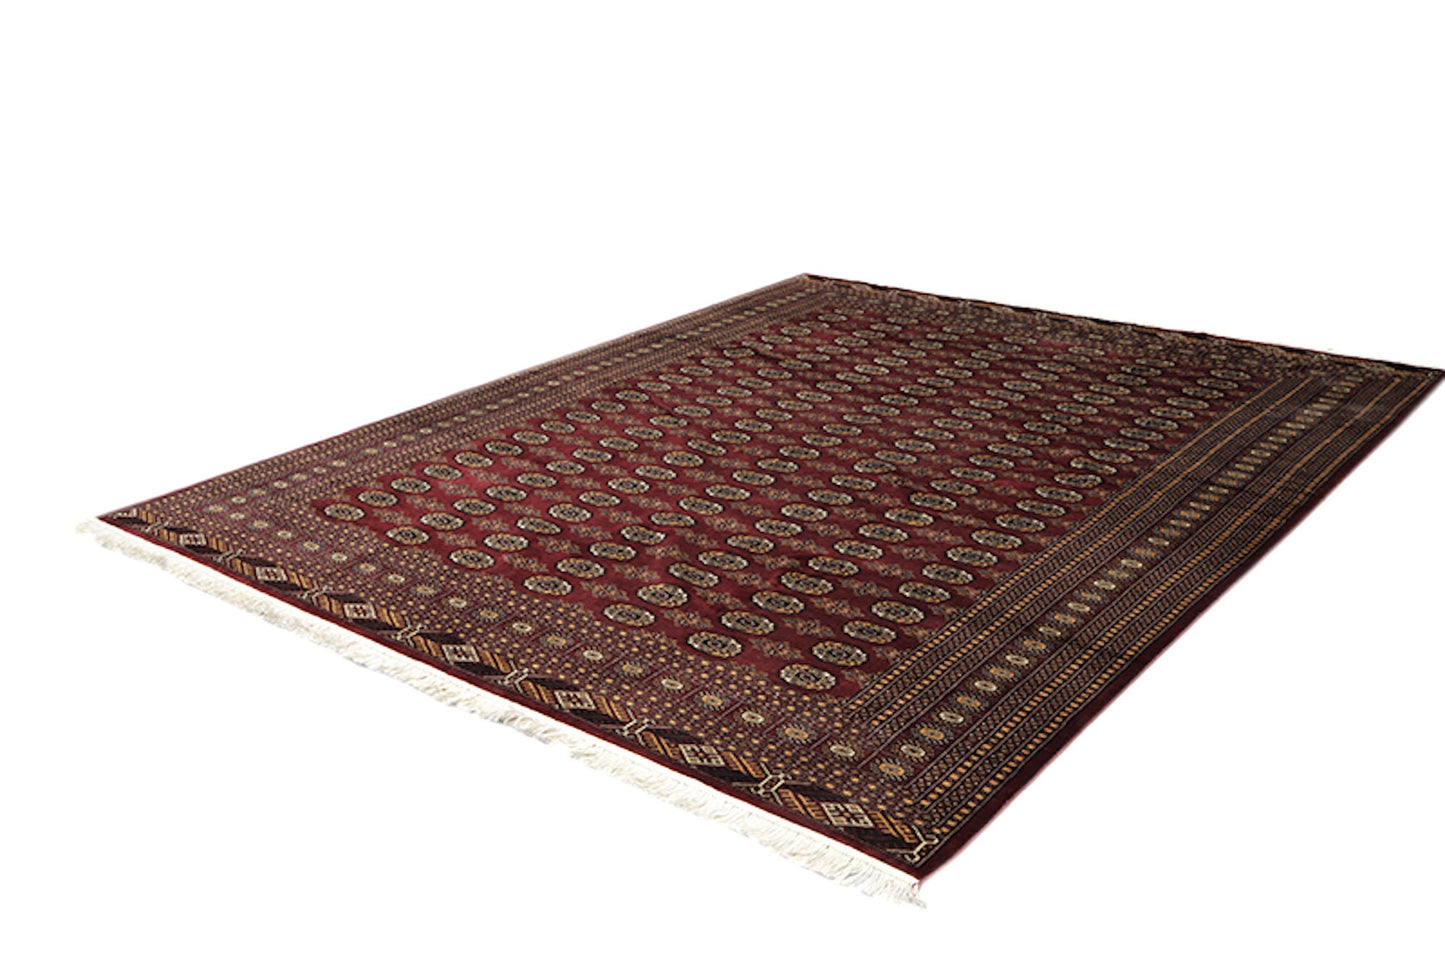 8 x 10 Dark Red Oriental Antique Rug | Bordered Rug with Repeating Geometric Pattern | Soft Wool with Thick Pile | Oversized Living Rug